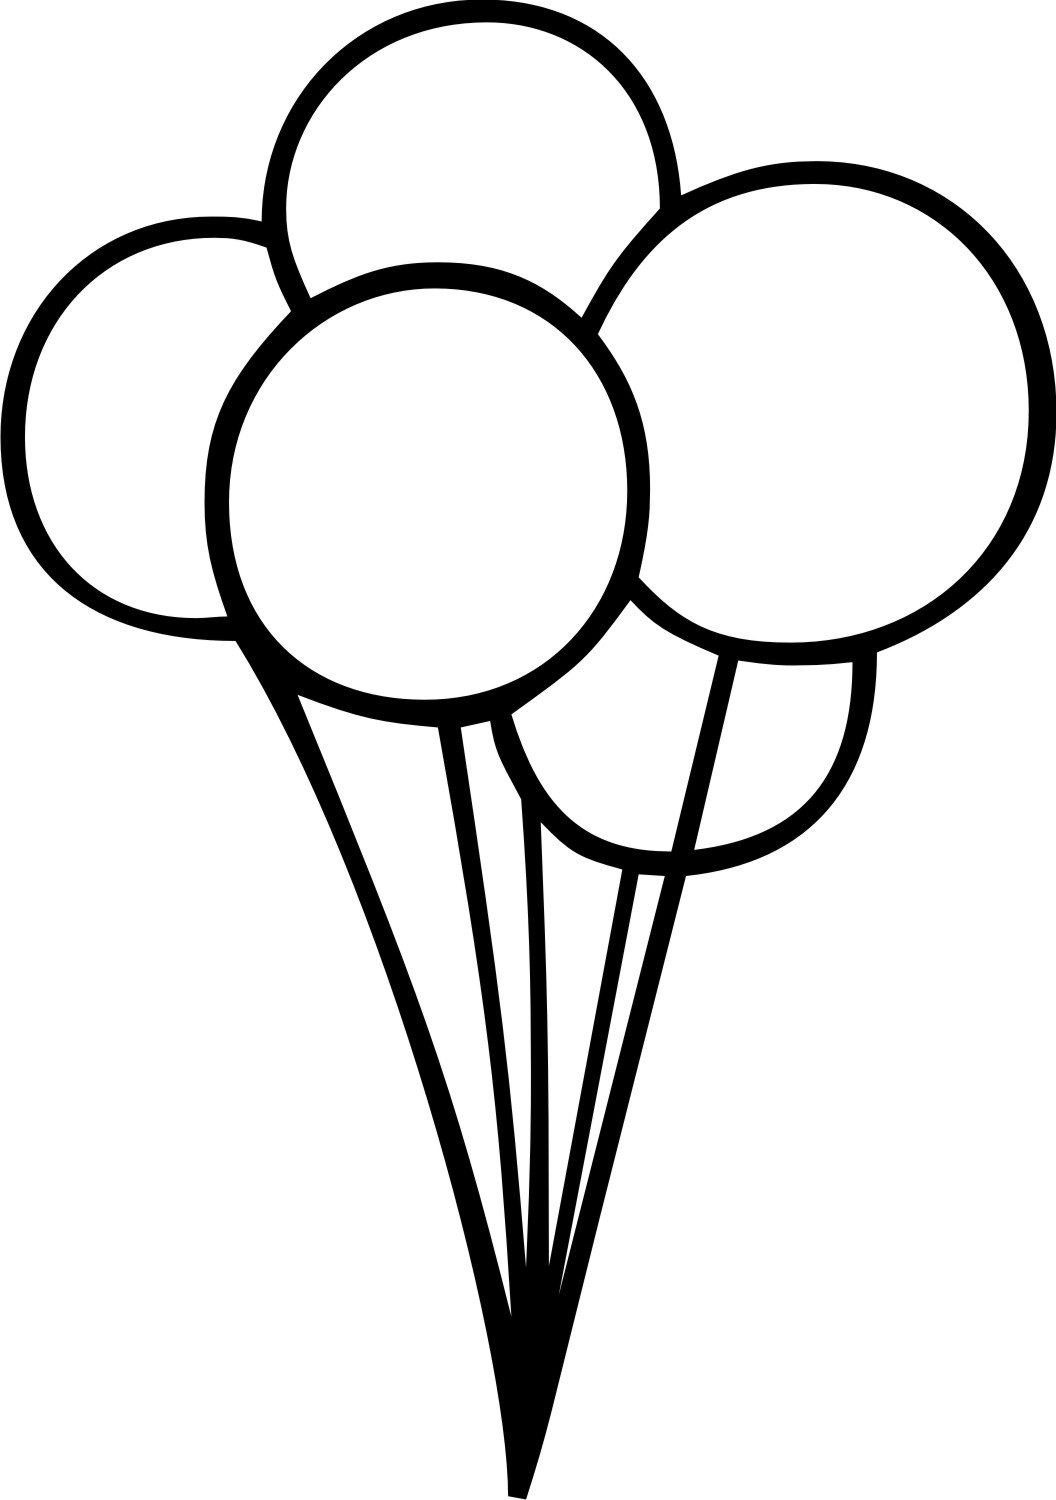 Balloon Outline - Clipart library